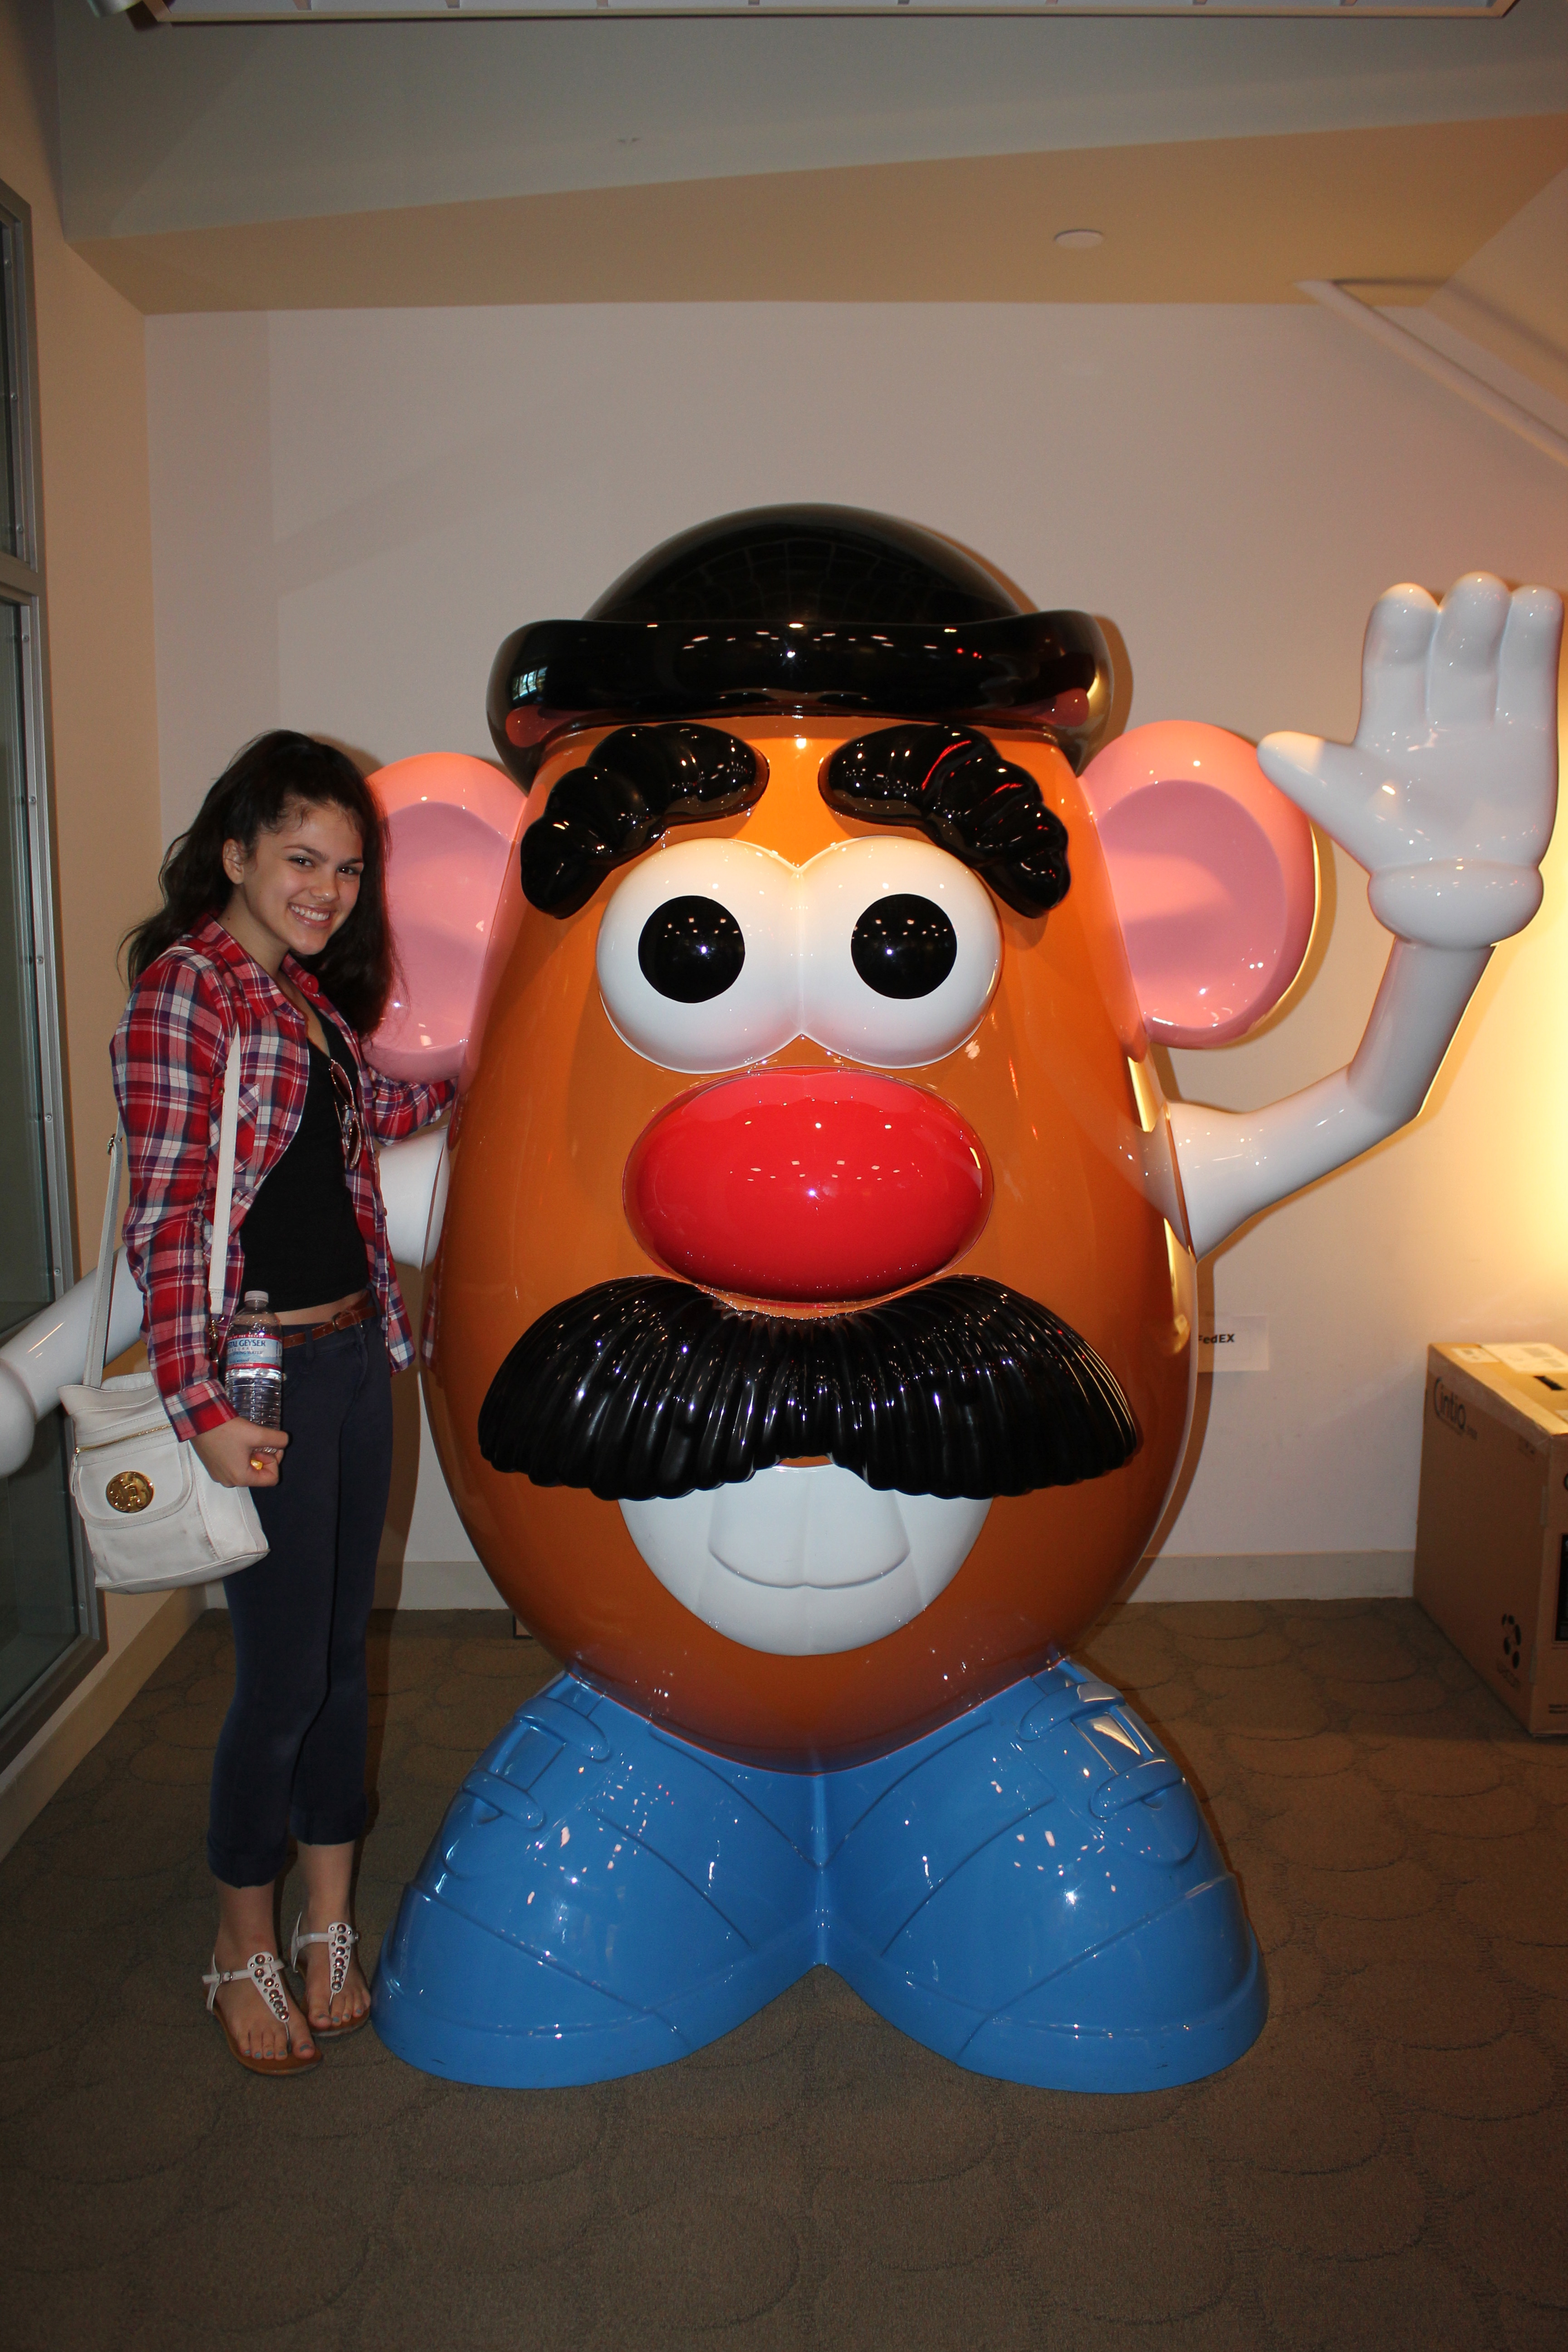 Fallon at the network visiting with Mr. Potato Head